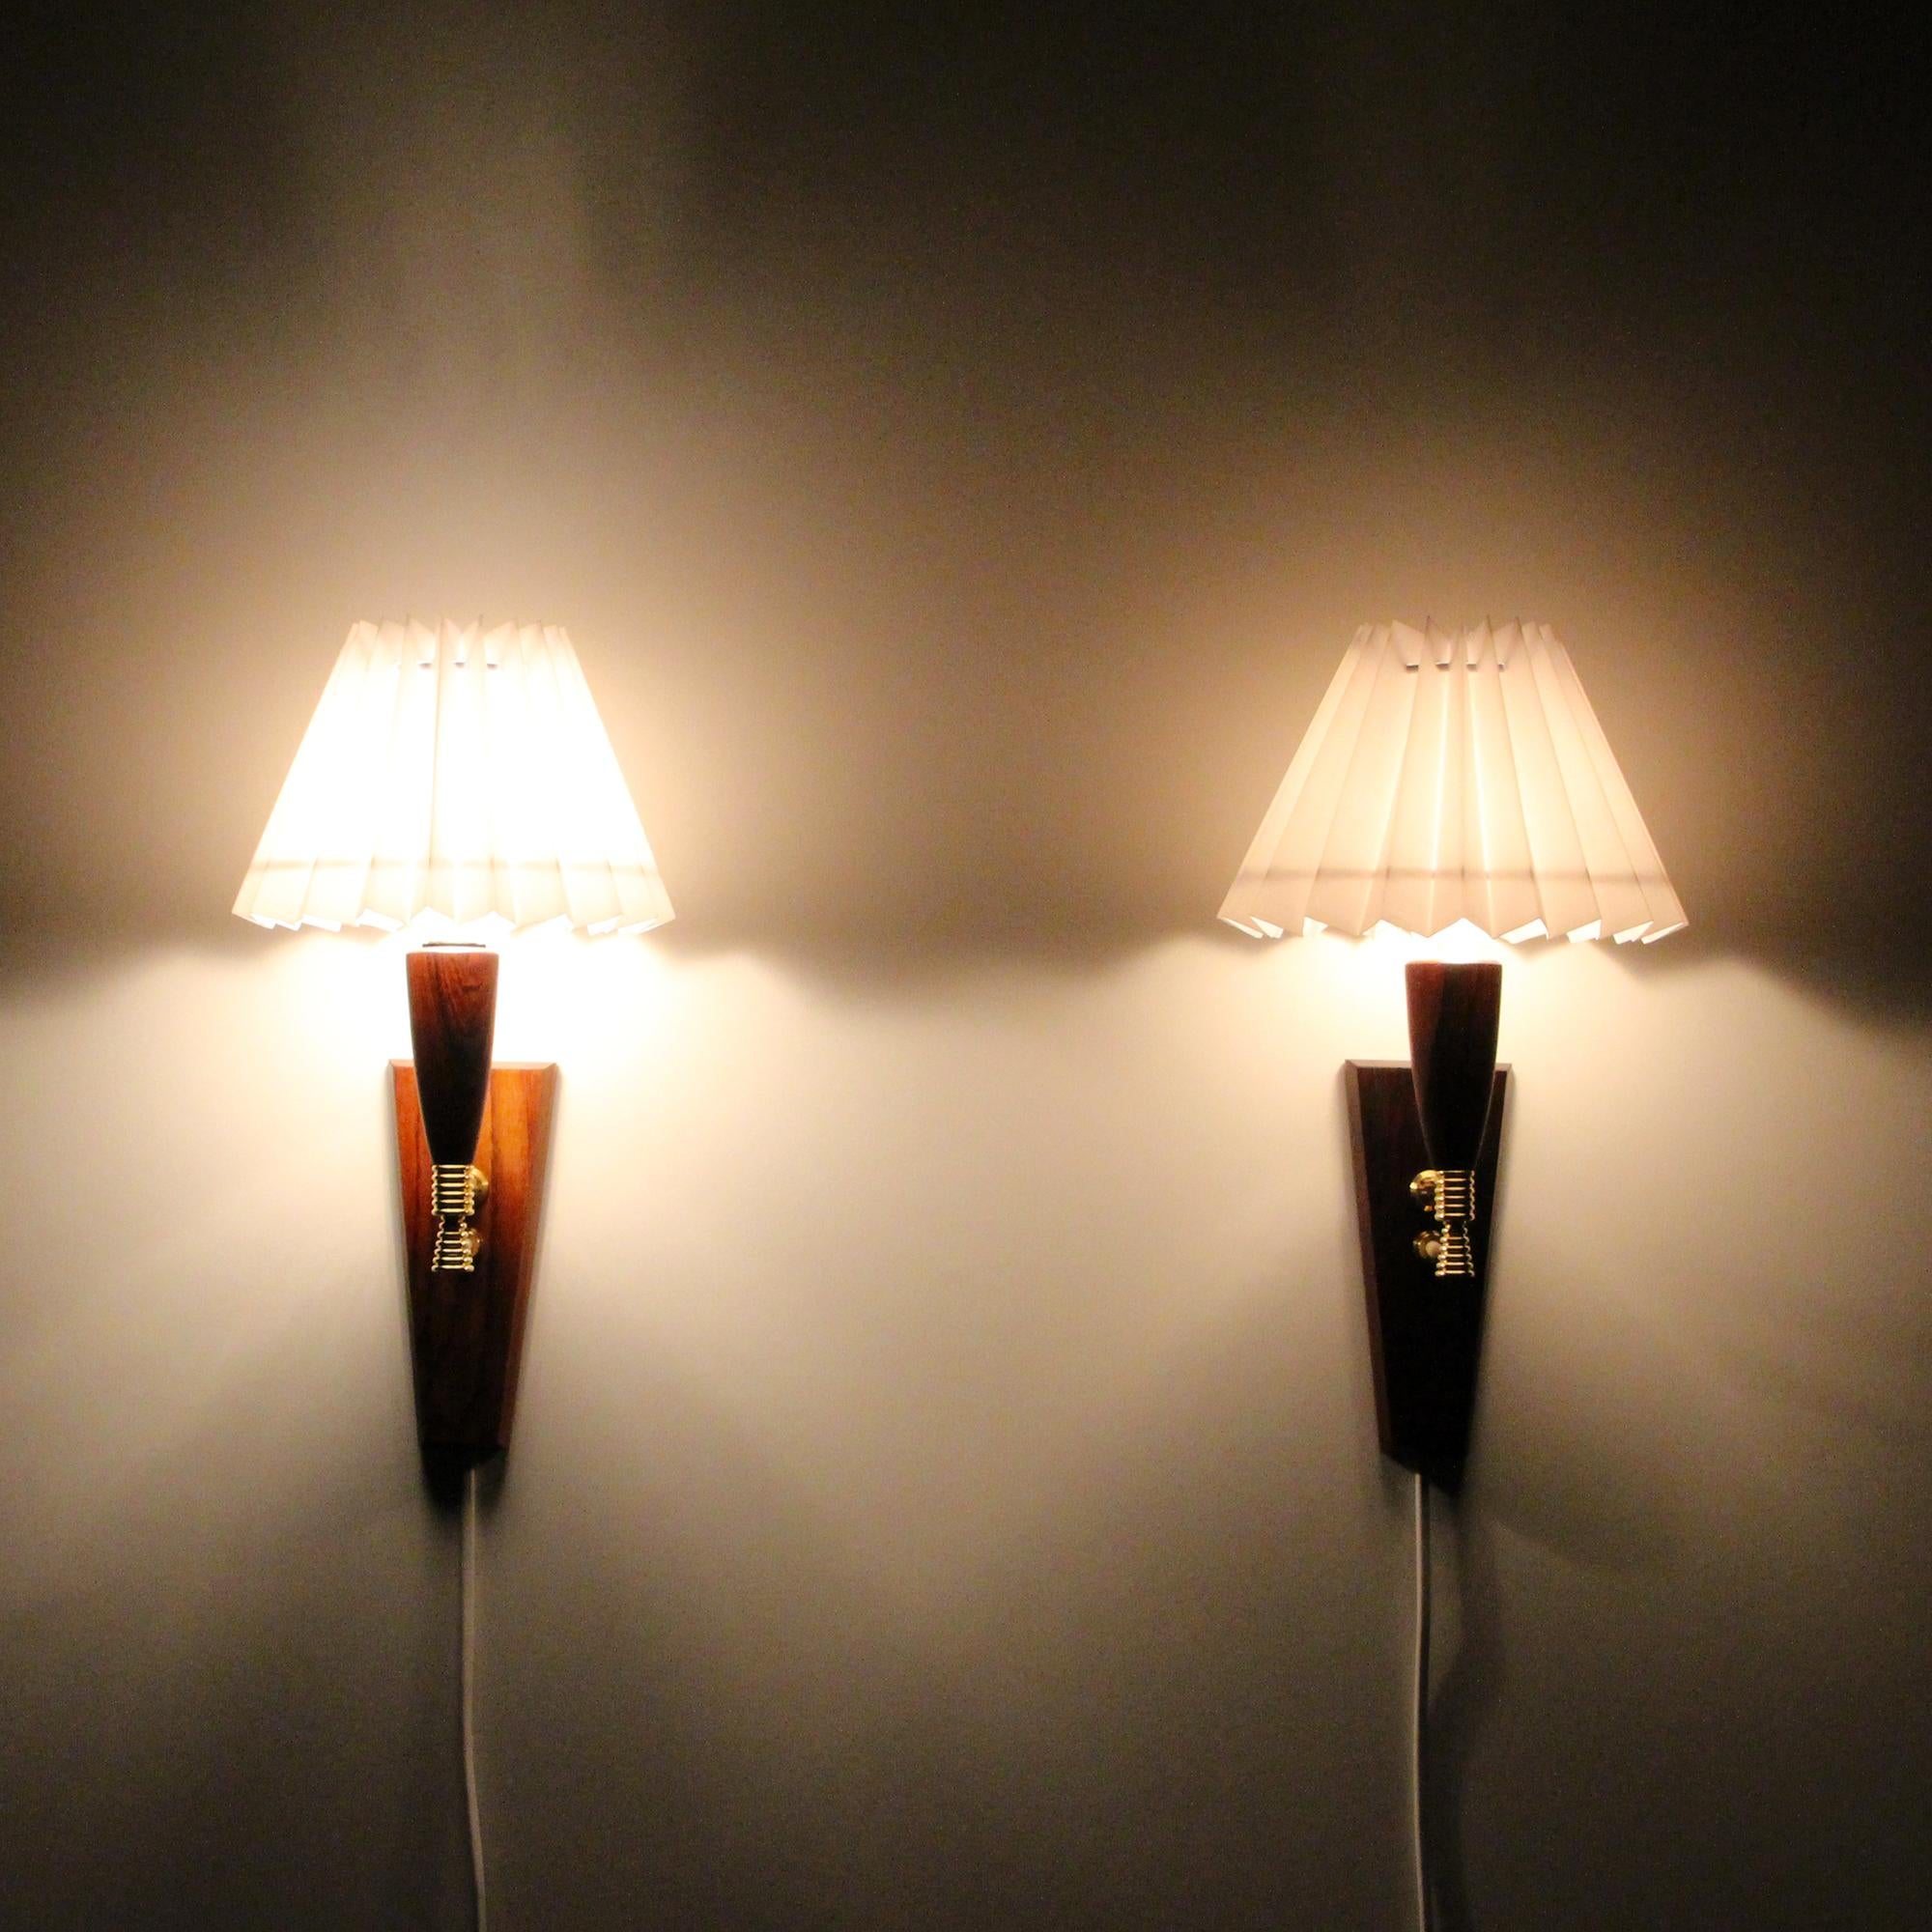 Mid-Century Modern Teak Wall Lights 'Pair' by Laoni Belysning, 1960s Danish Midcentury Wall Lamps